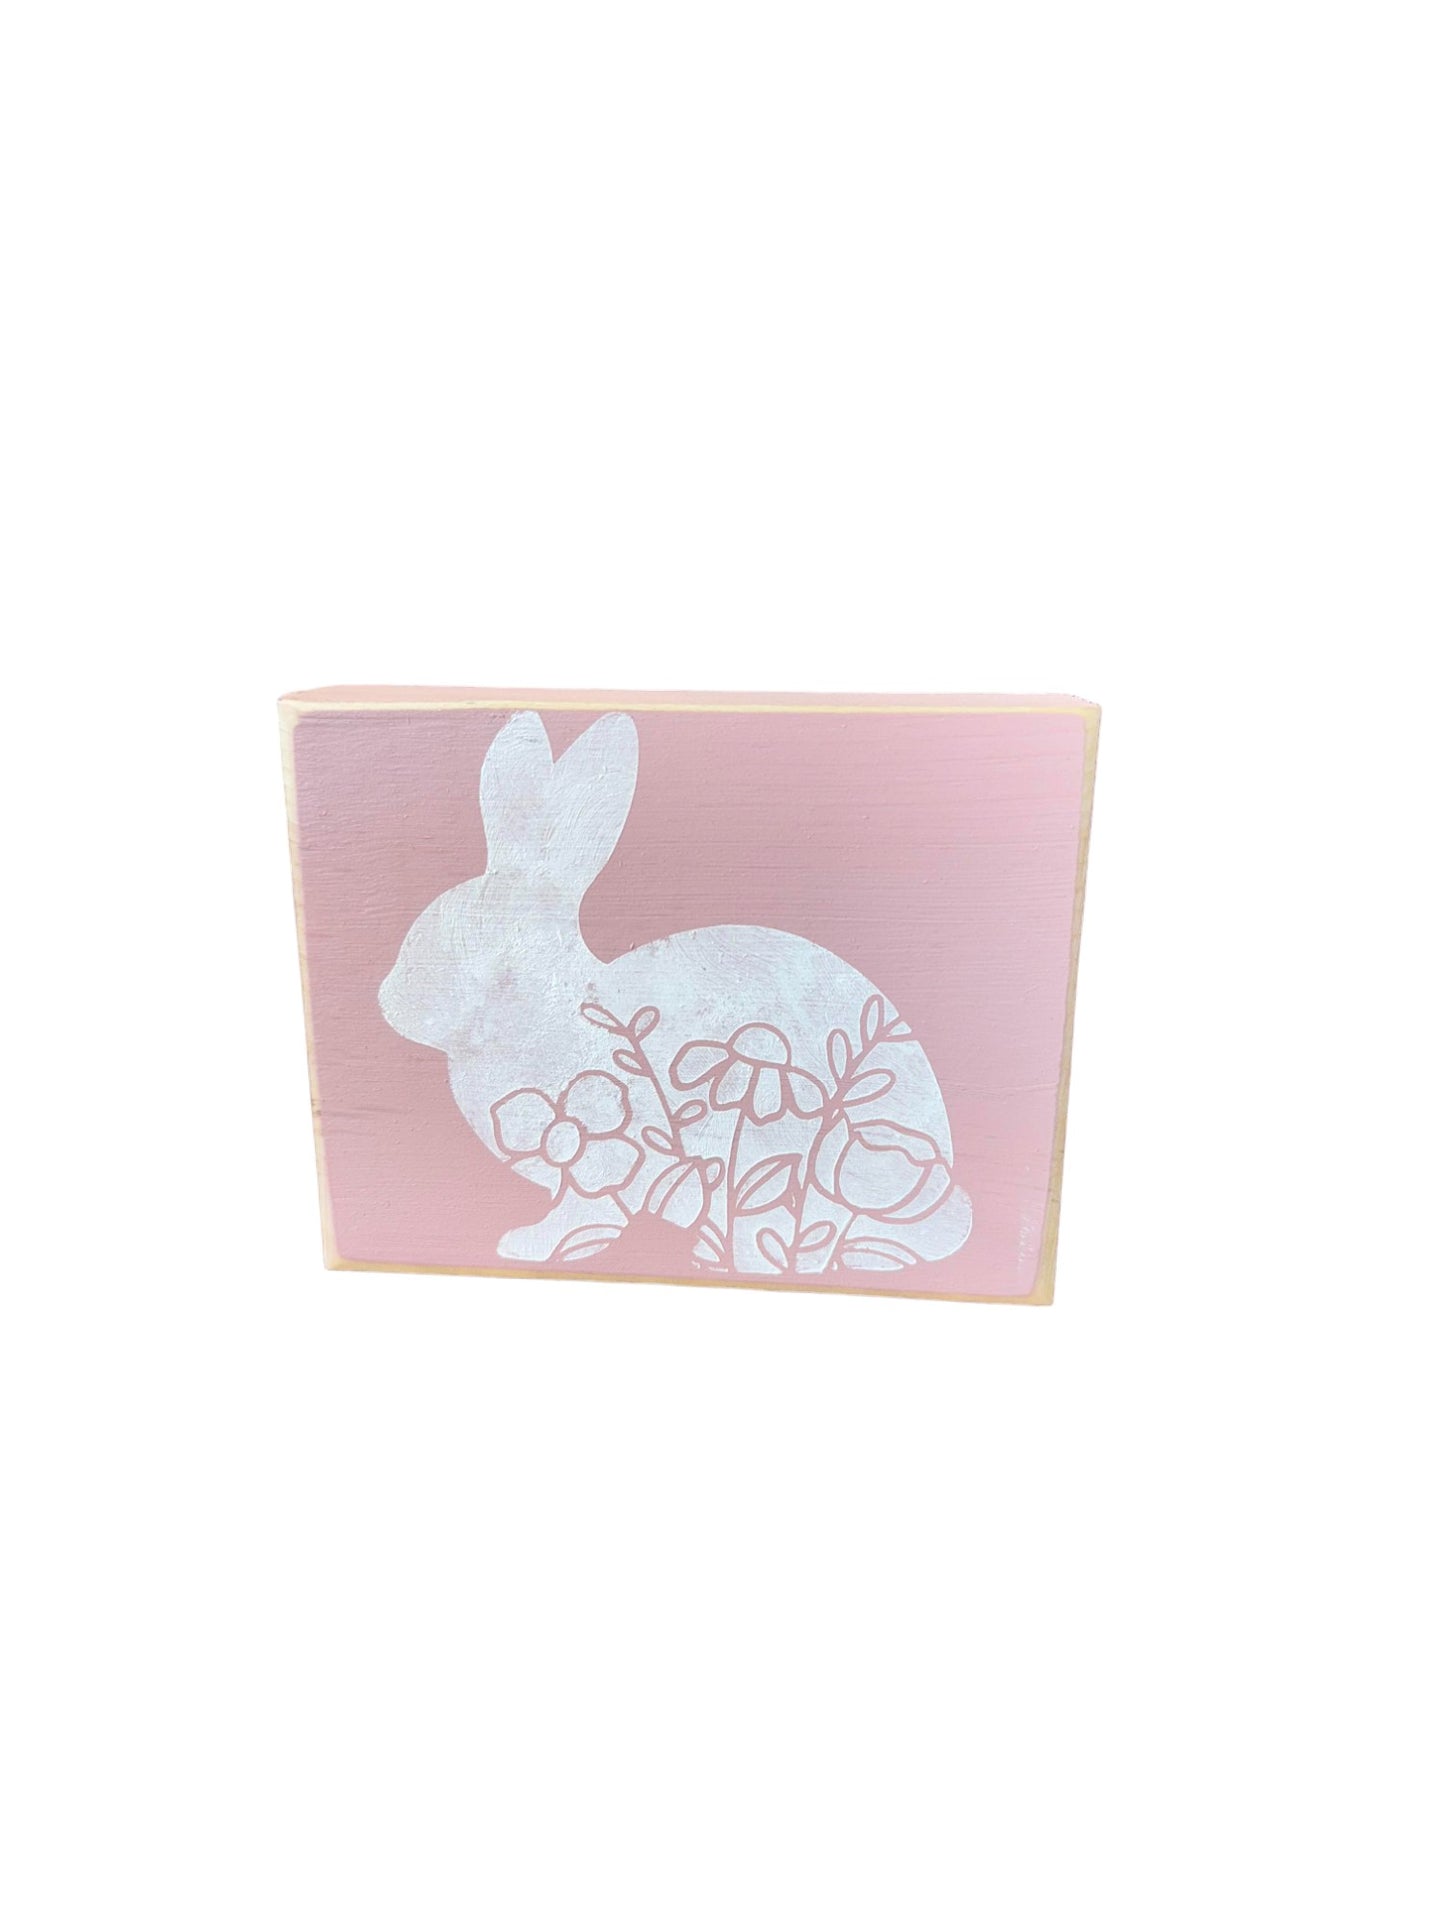 Pink Floral Bunny Silhoutte Decorative Easter Block Sign